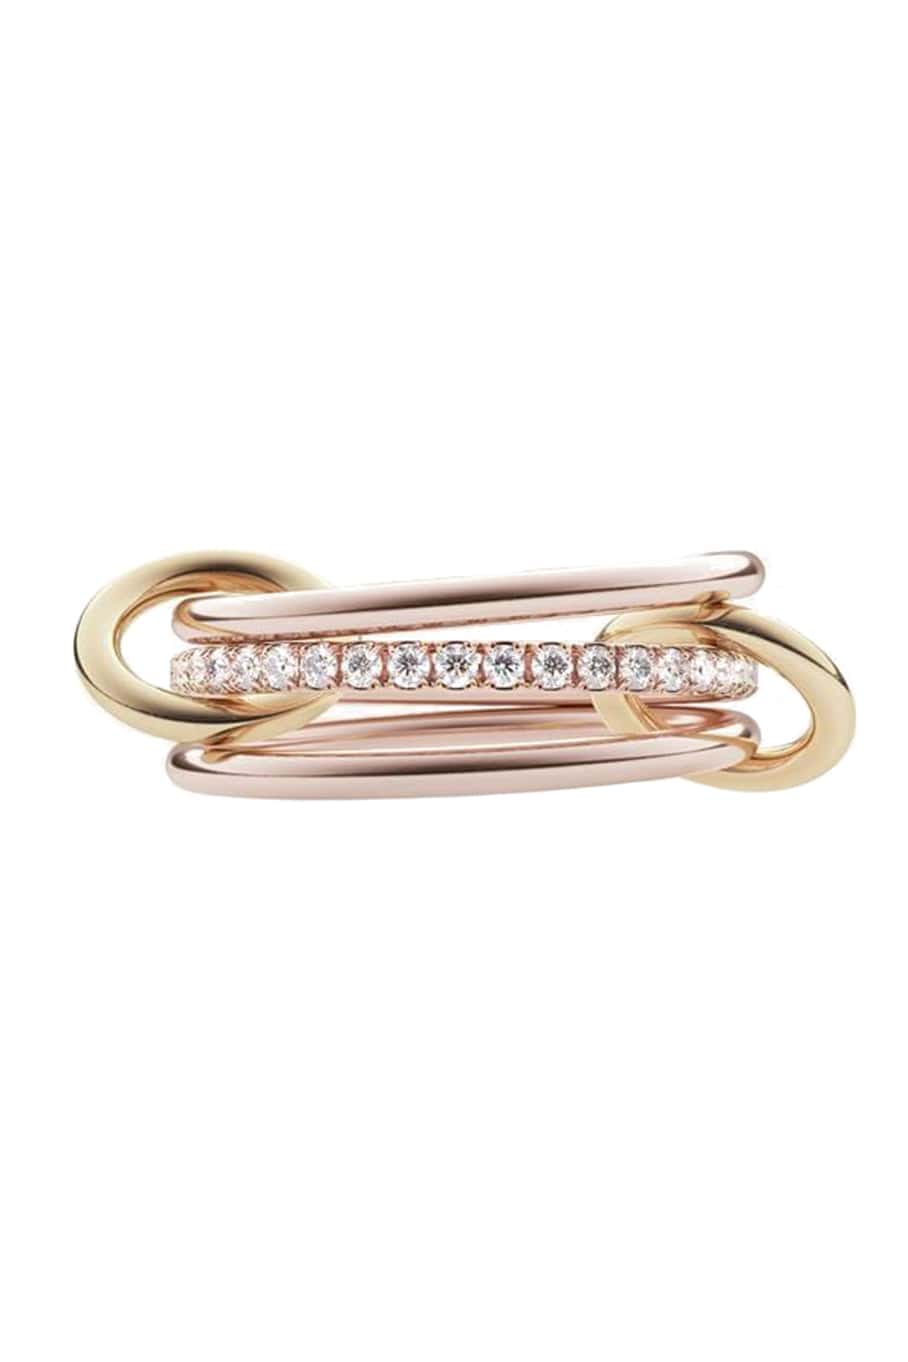 SPINELLI KILCOLLIN-Sonny Gold and Diamond 3 Link Rings-ROSE GOLD